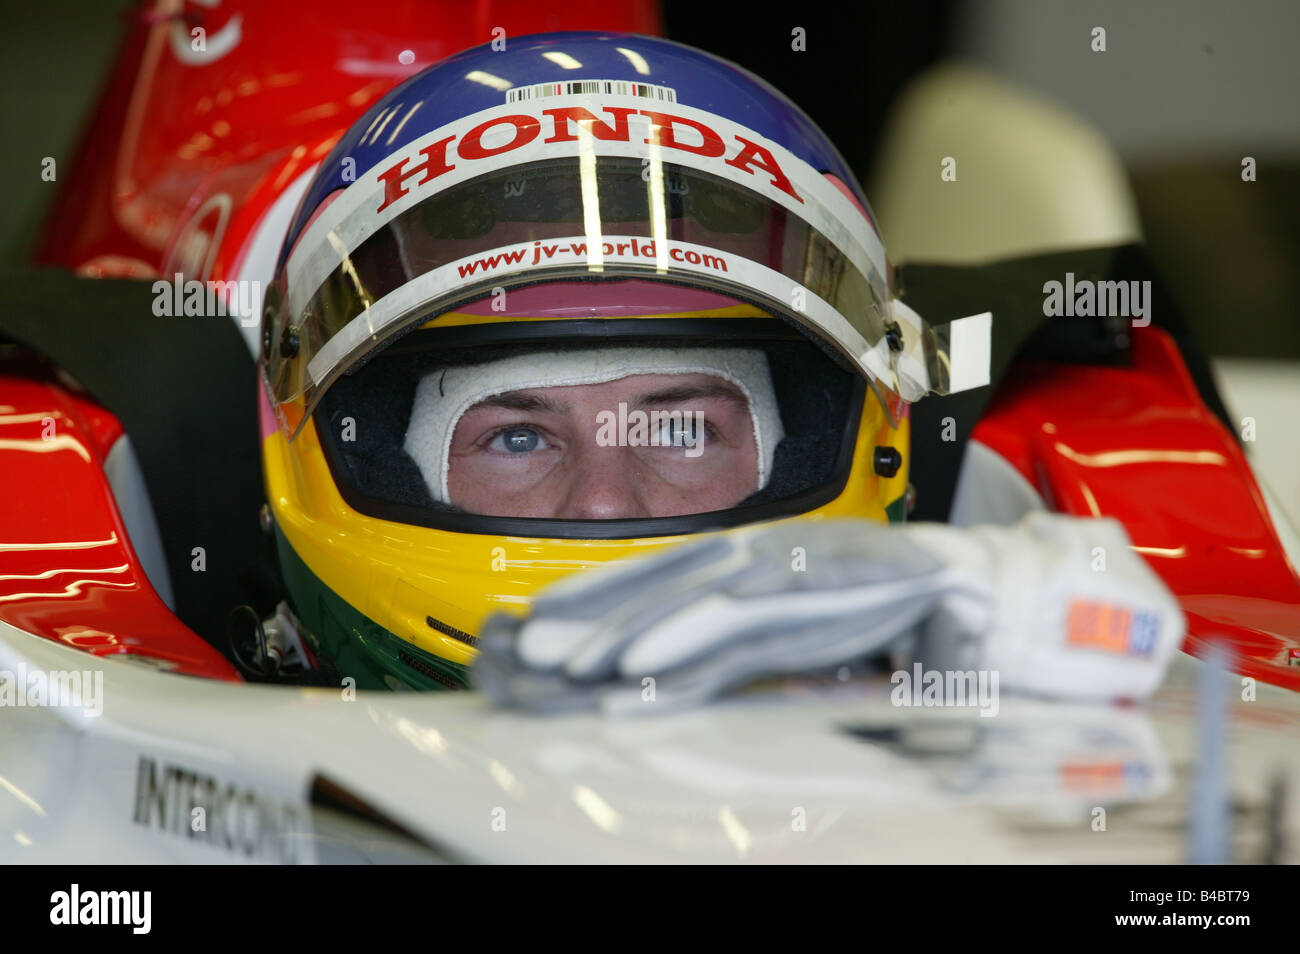 engine sport, Formel 1, Jacques Villeneuve, training, sitting in the racing  approx. , BAR-Honda, Persons, Race driver, Portrait Stock Photo - Alamy